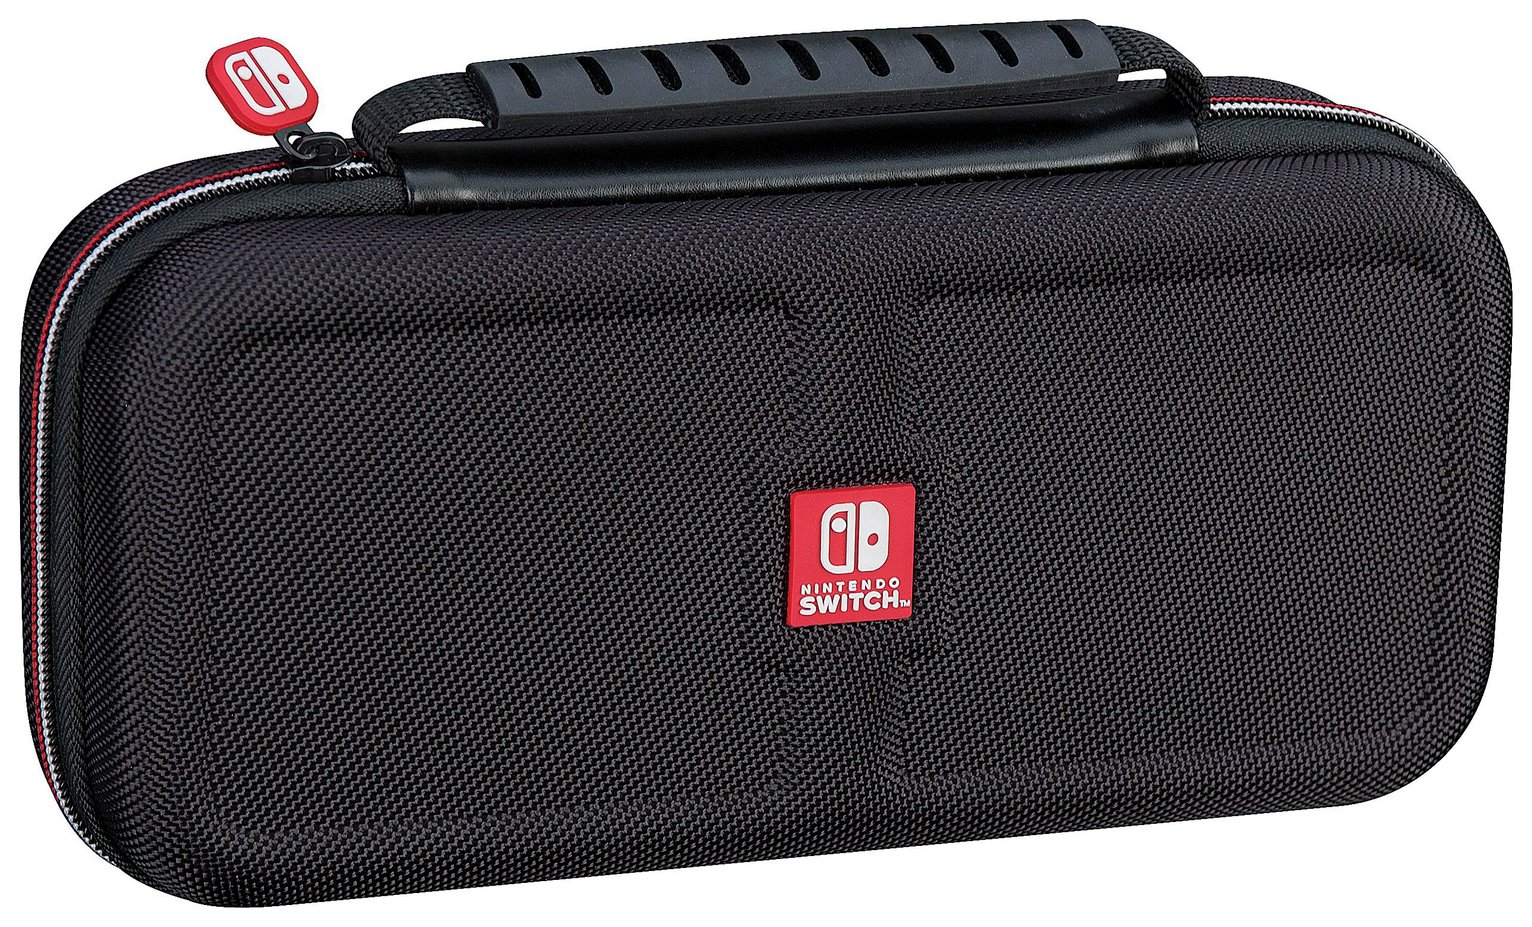 RDS Nintendo Switch Pouch Review